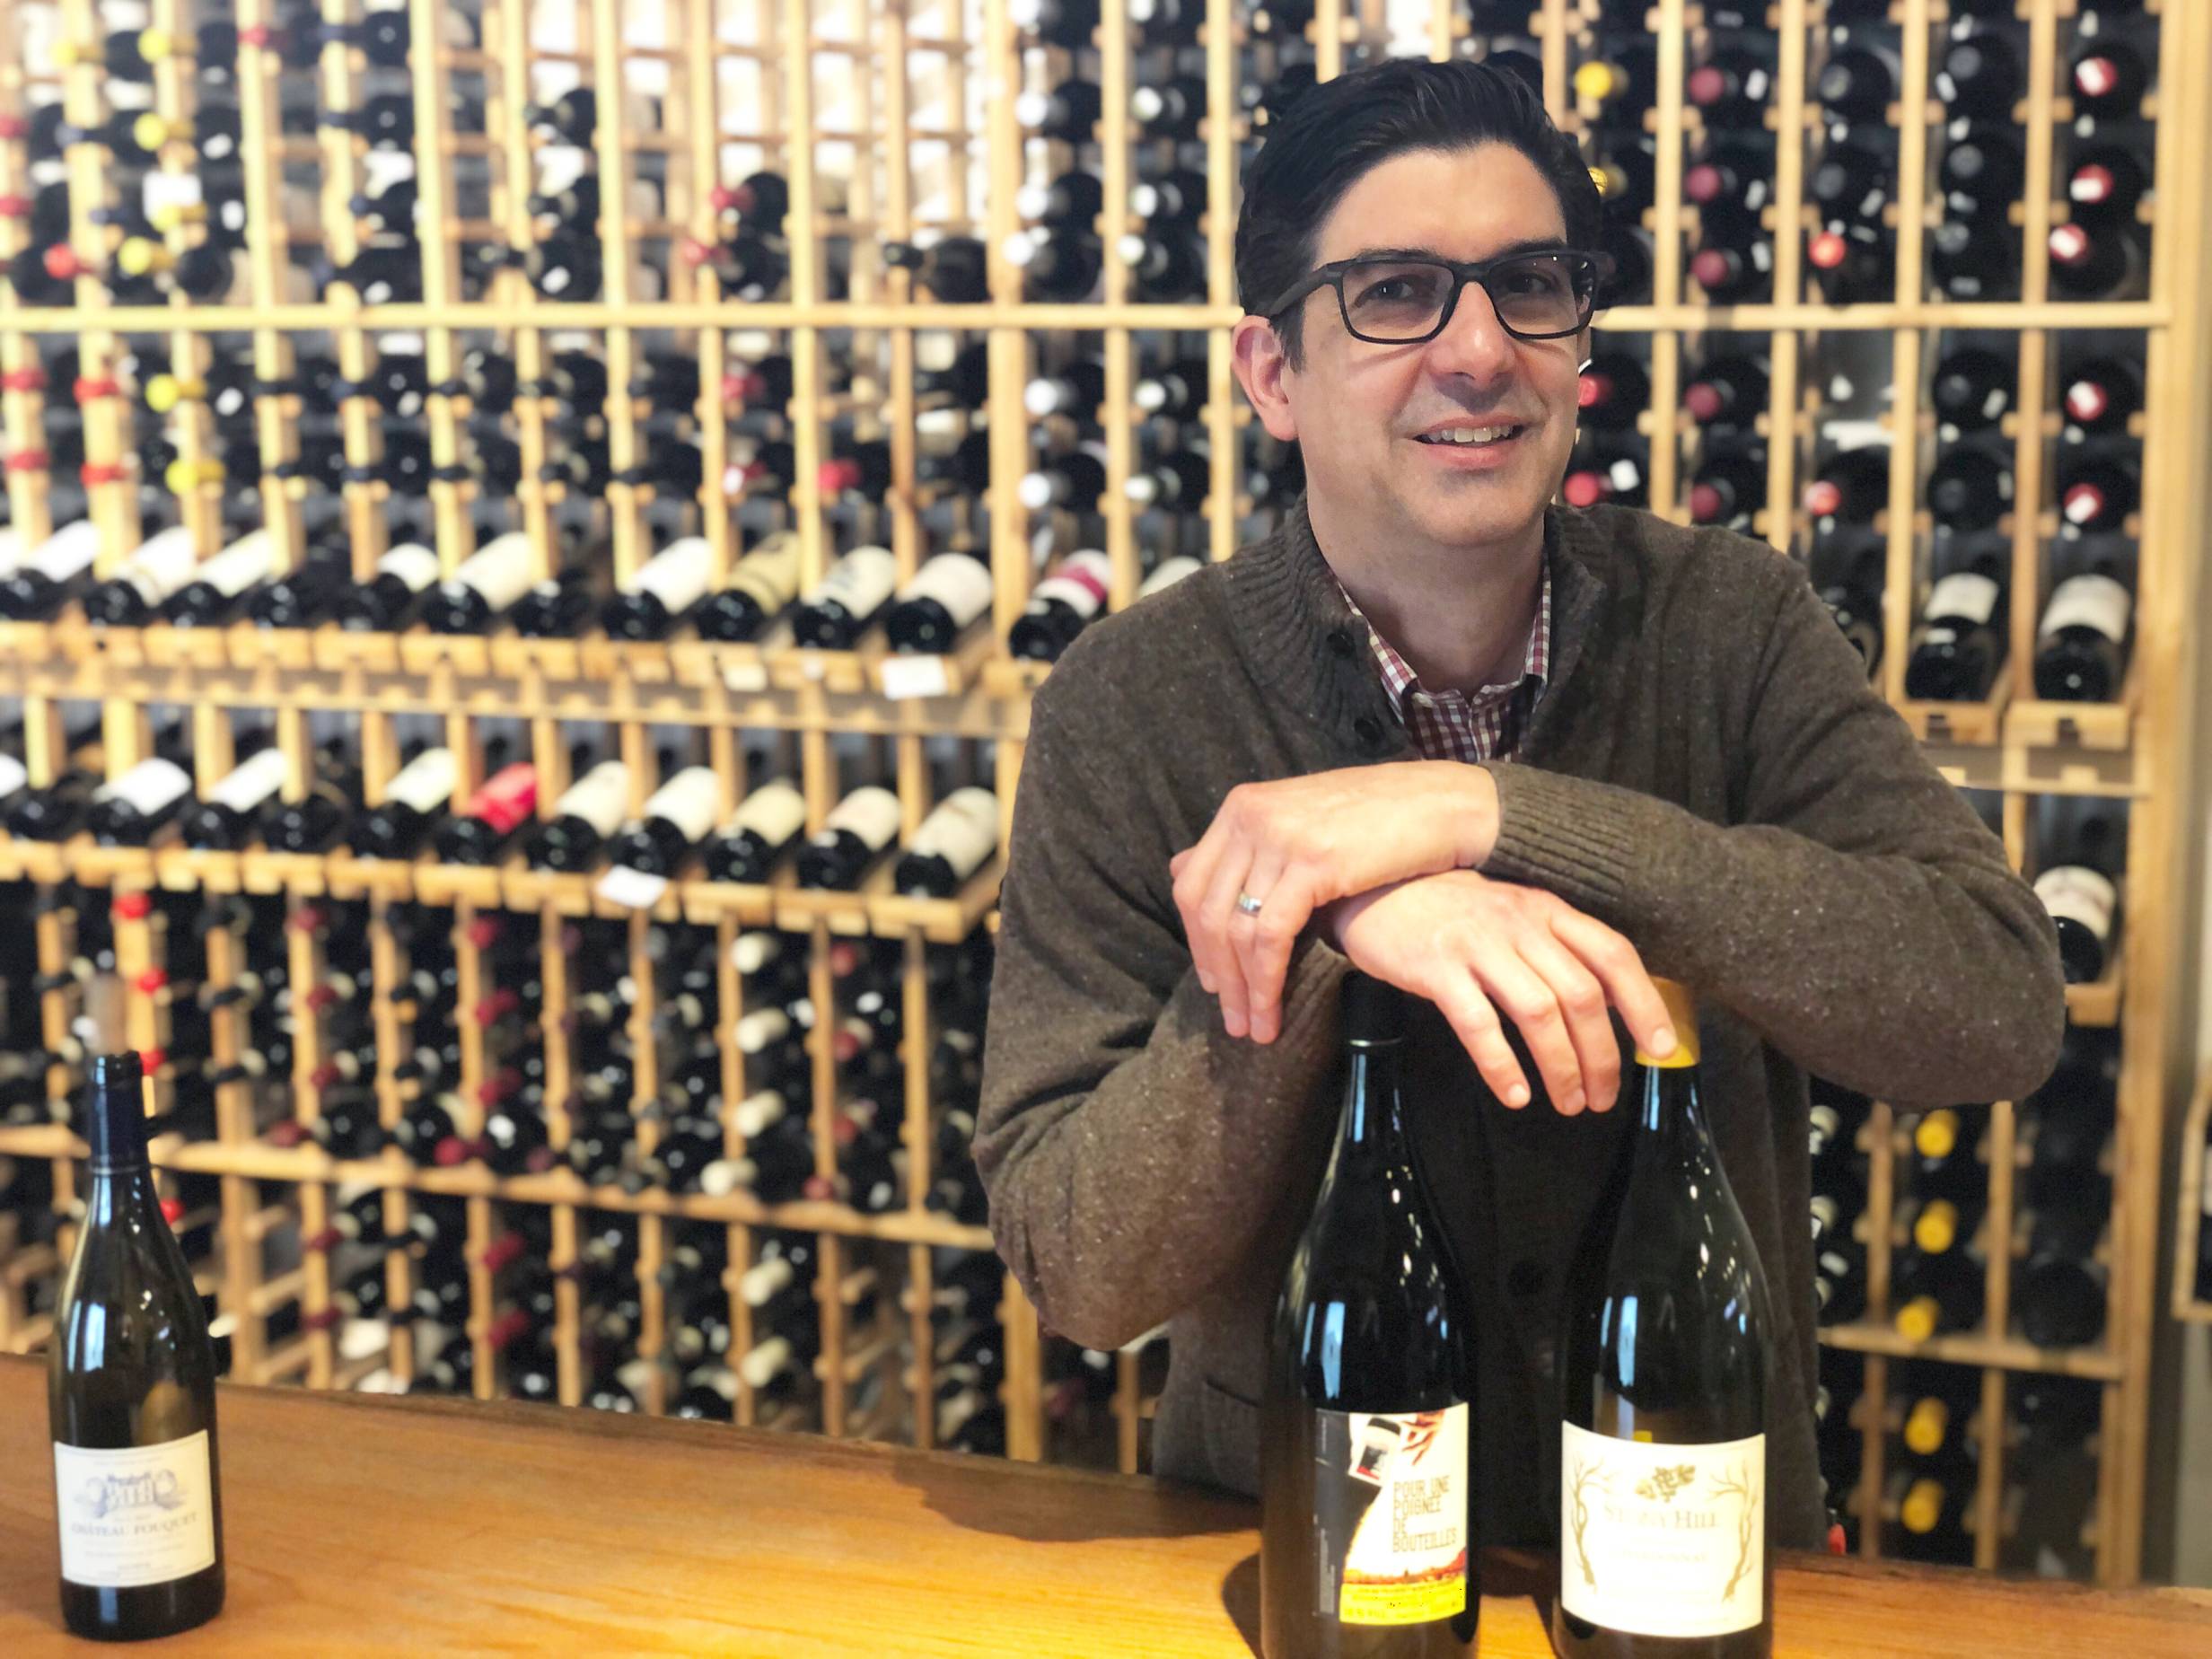 Todd Fusco stands over two bottles of wine on a wooden bar. He is wearing glasses and leaning both hands on the bottles. Behind him are wooden shelves with hundreds of bottles of wine. Photo by Alyssa Buckley.